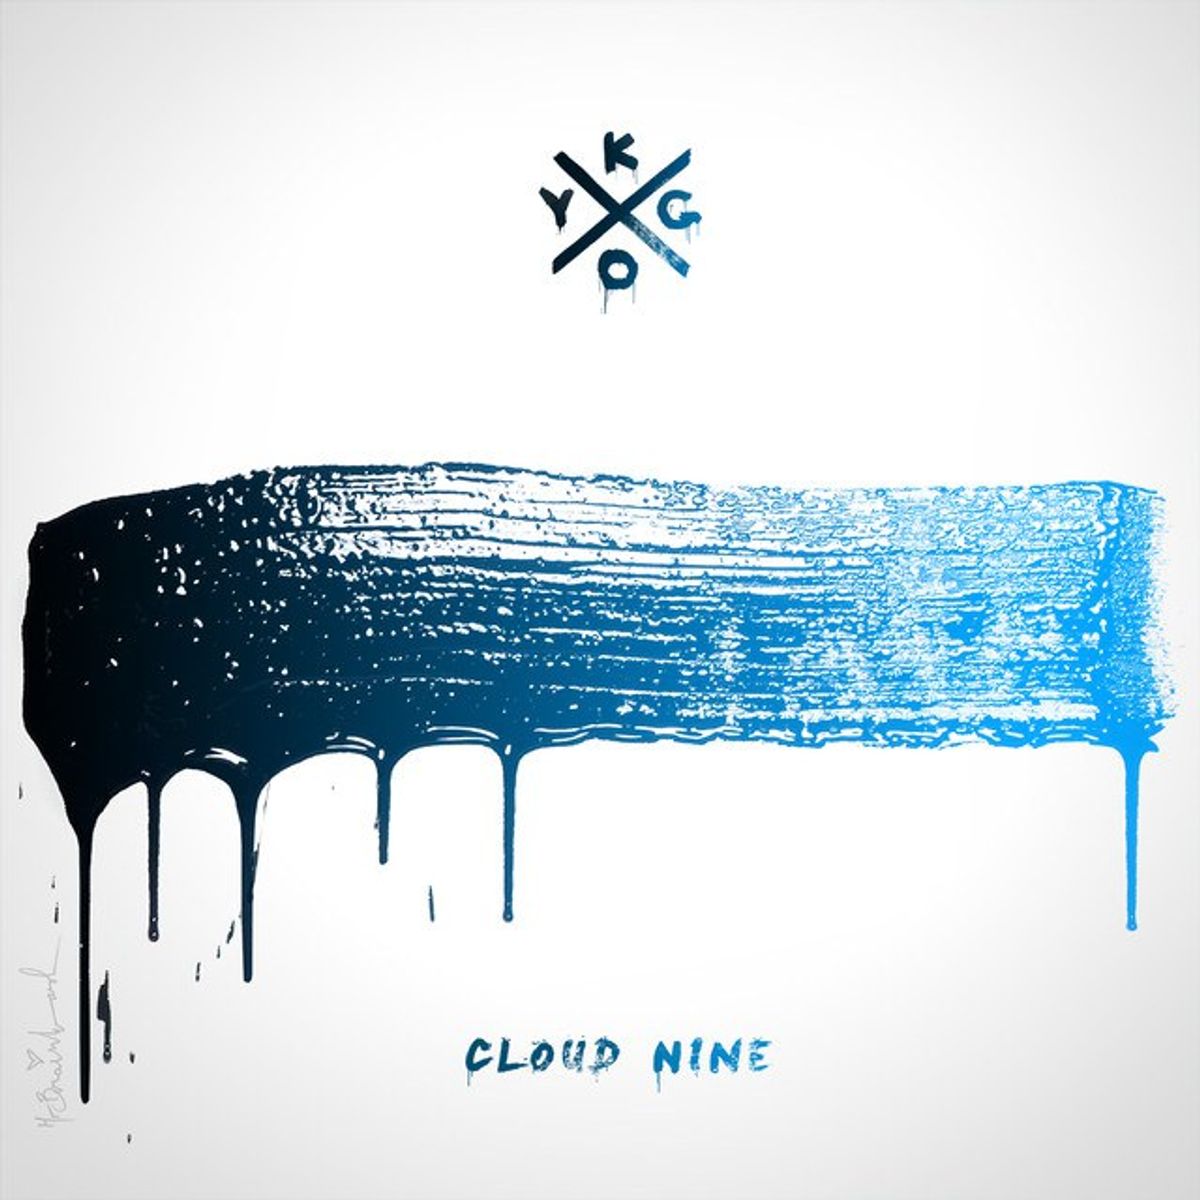 Kygo Pumps Up the Tropical House and More on “Cloud Nine” LP